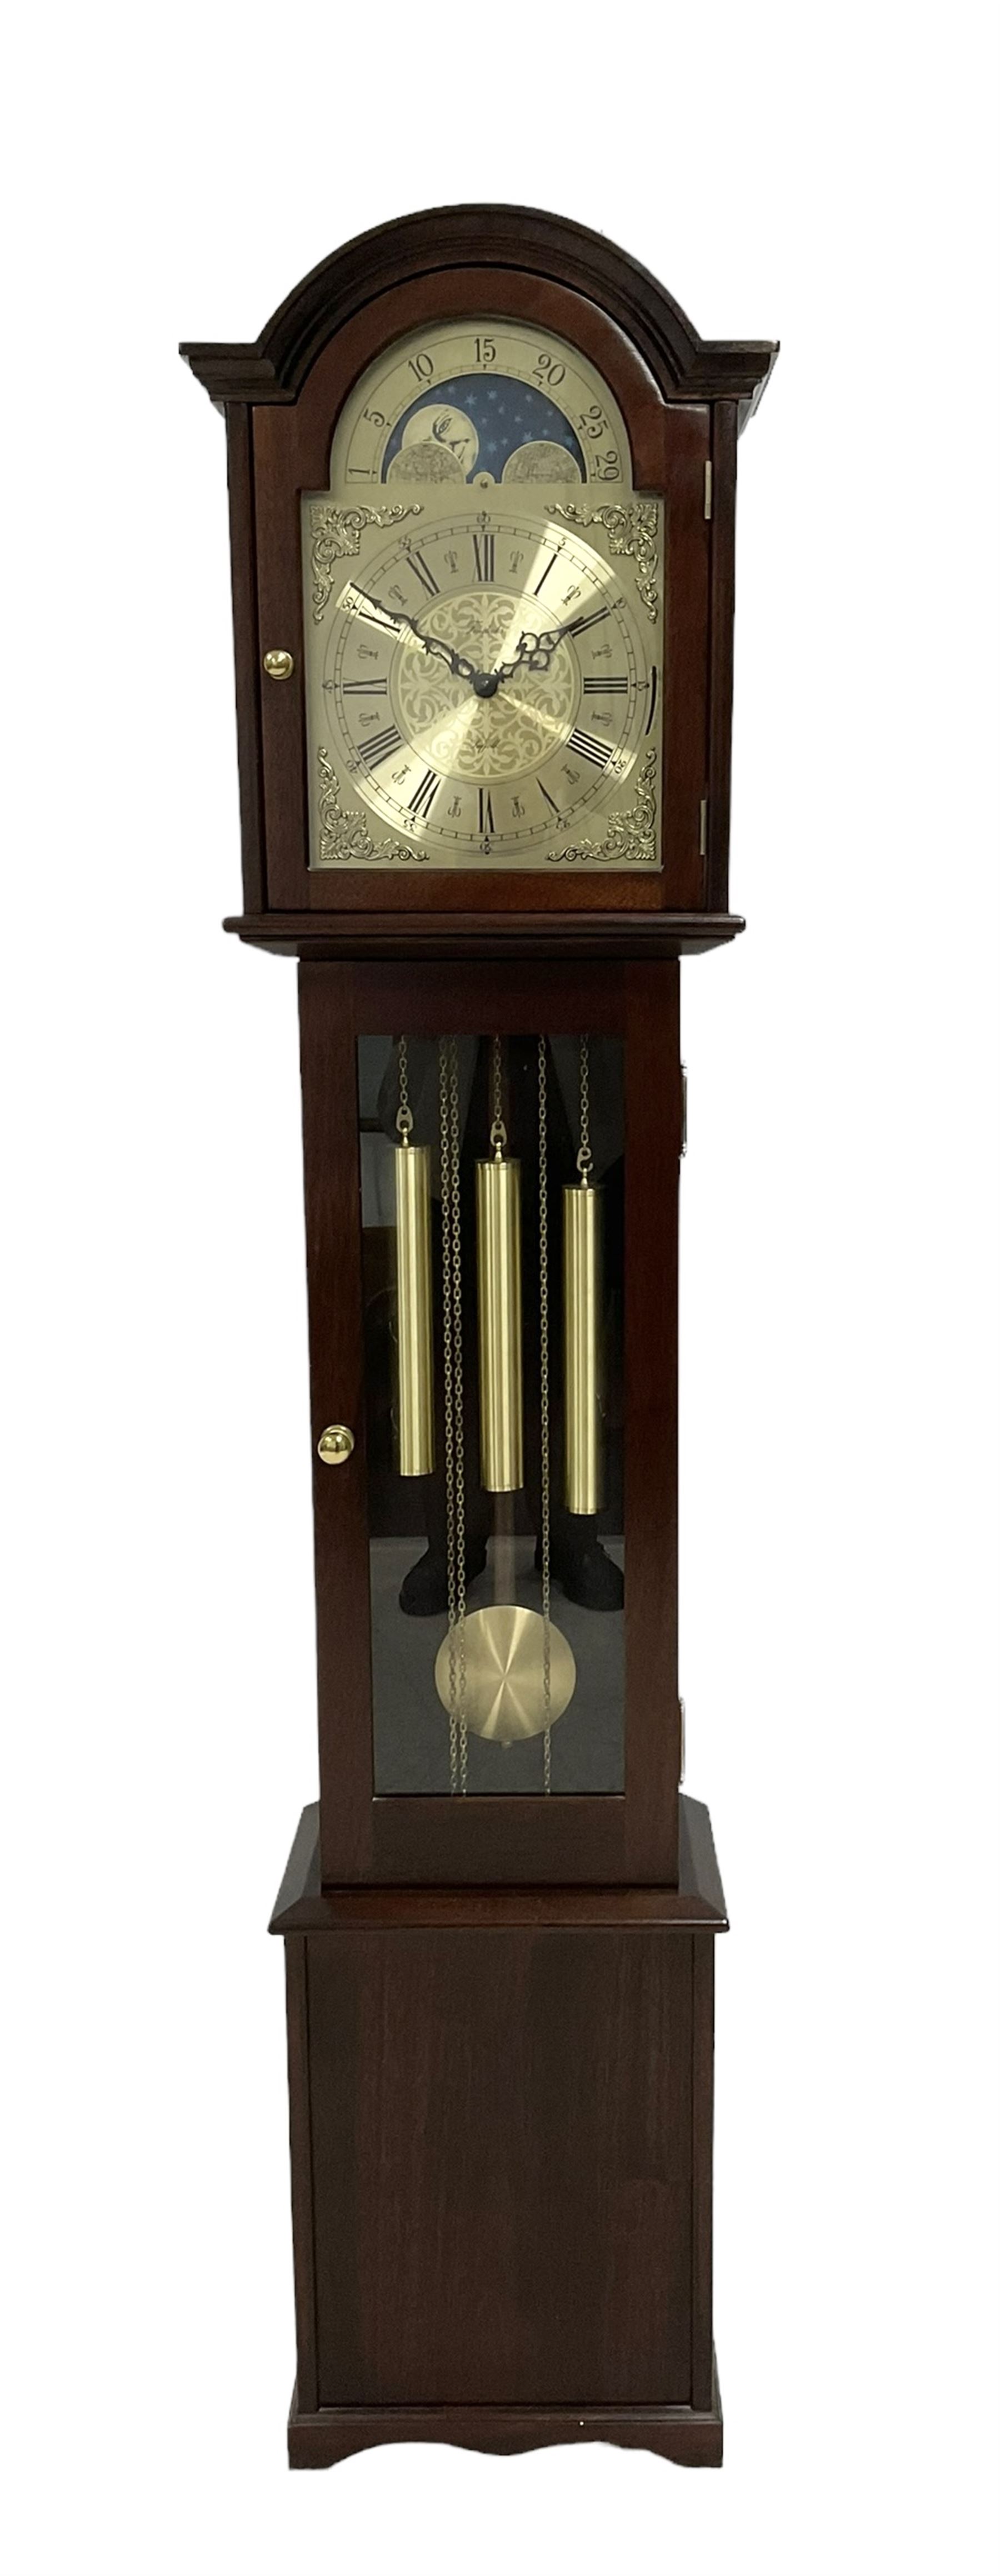 20th century - weight driven 8-day mahogany grandmother clock with a swans neck pediment and fully g - Image 3 of 6